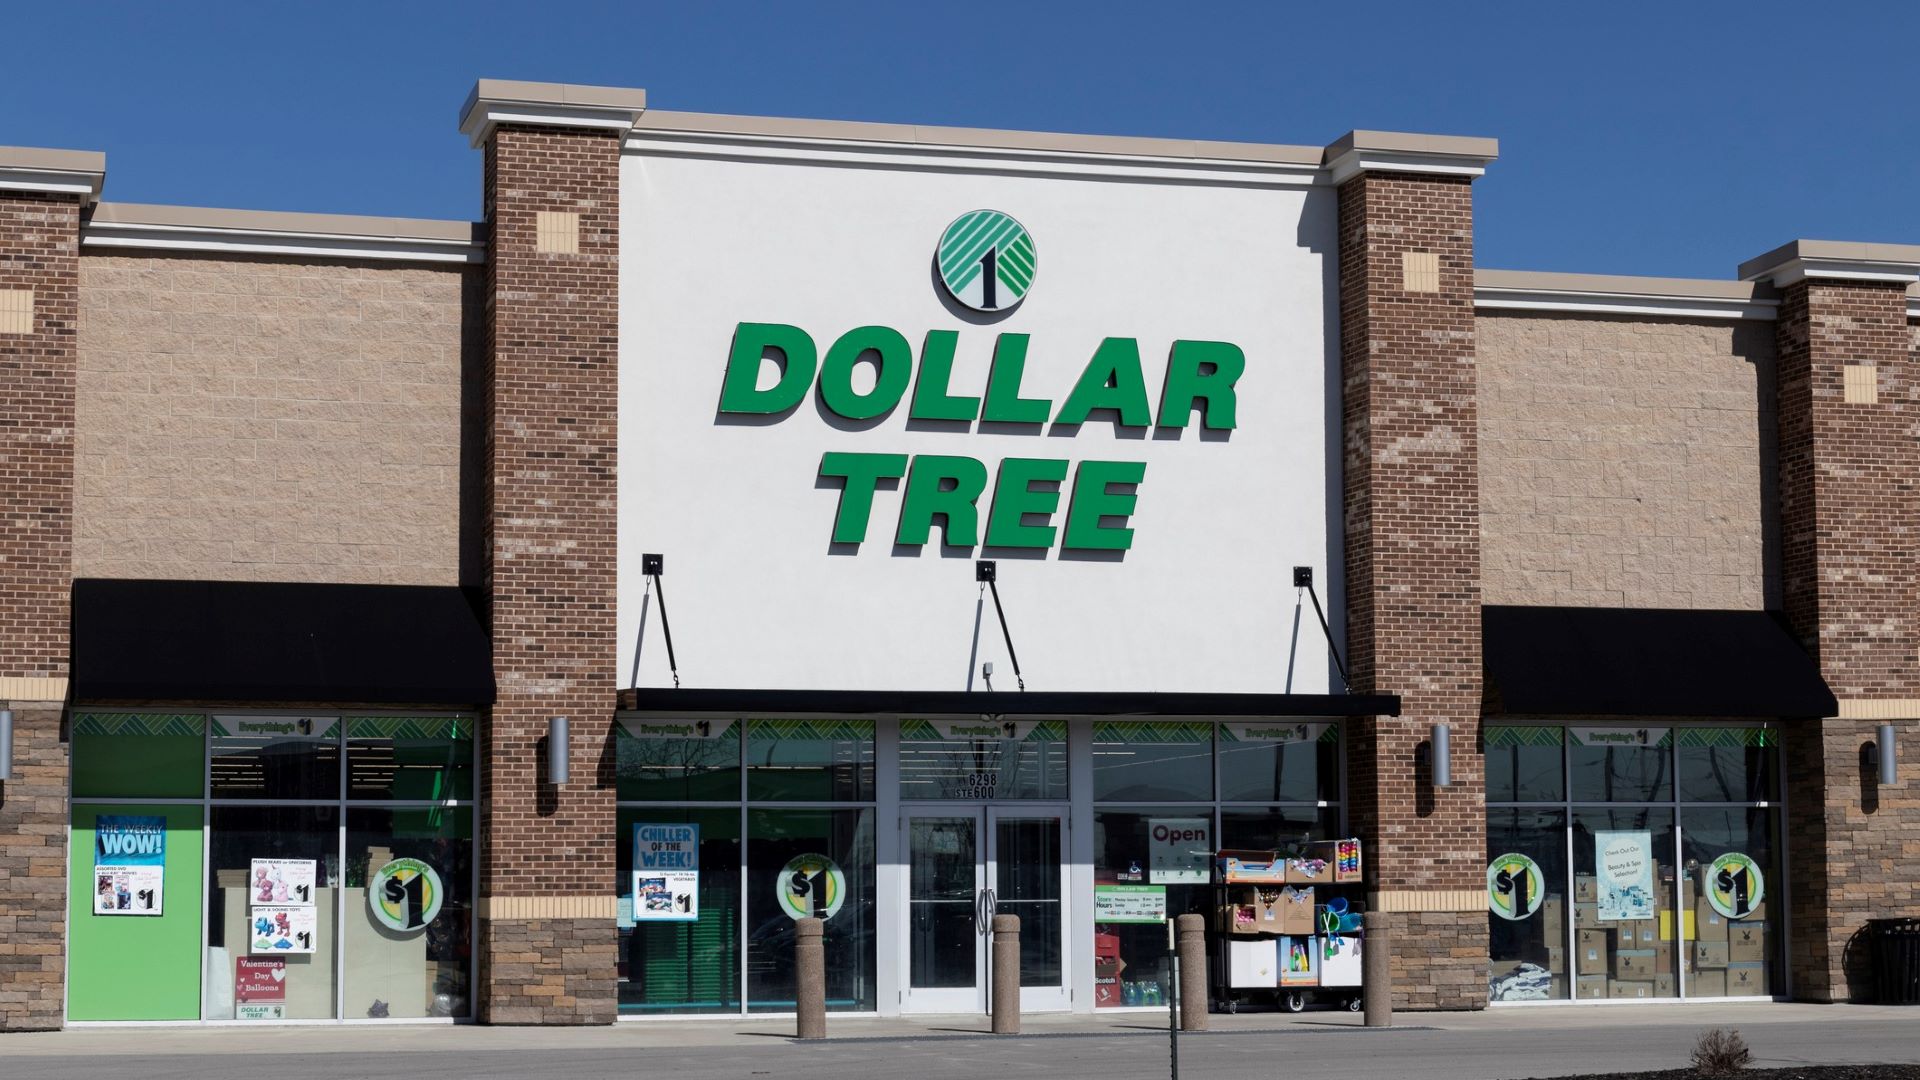 9 items worth buying at dollar tree on a middle-class budget